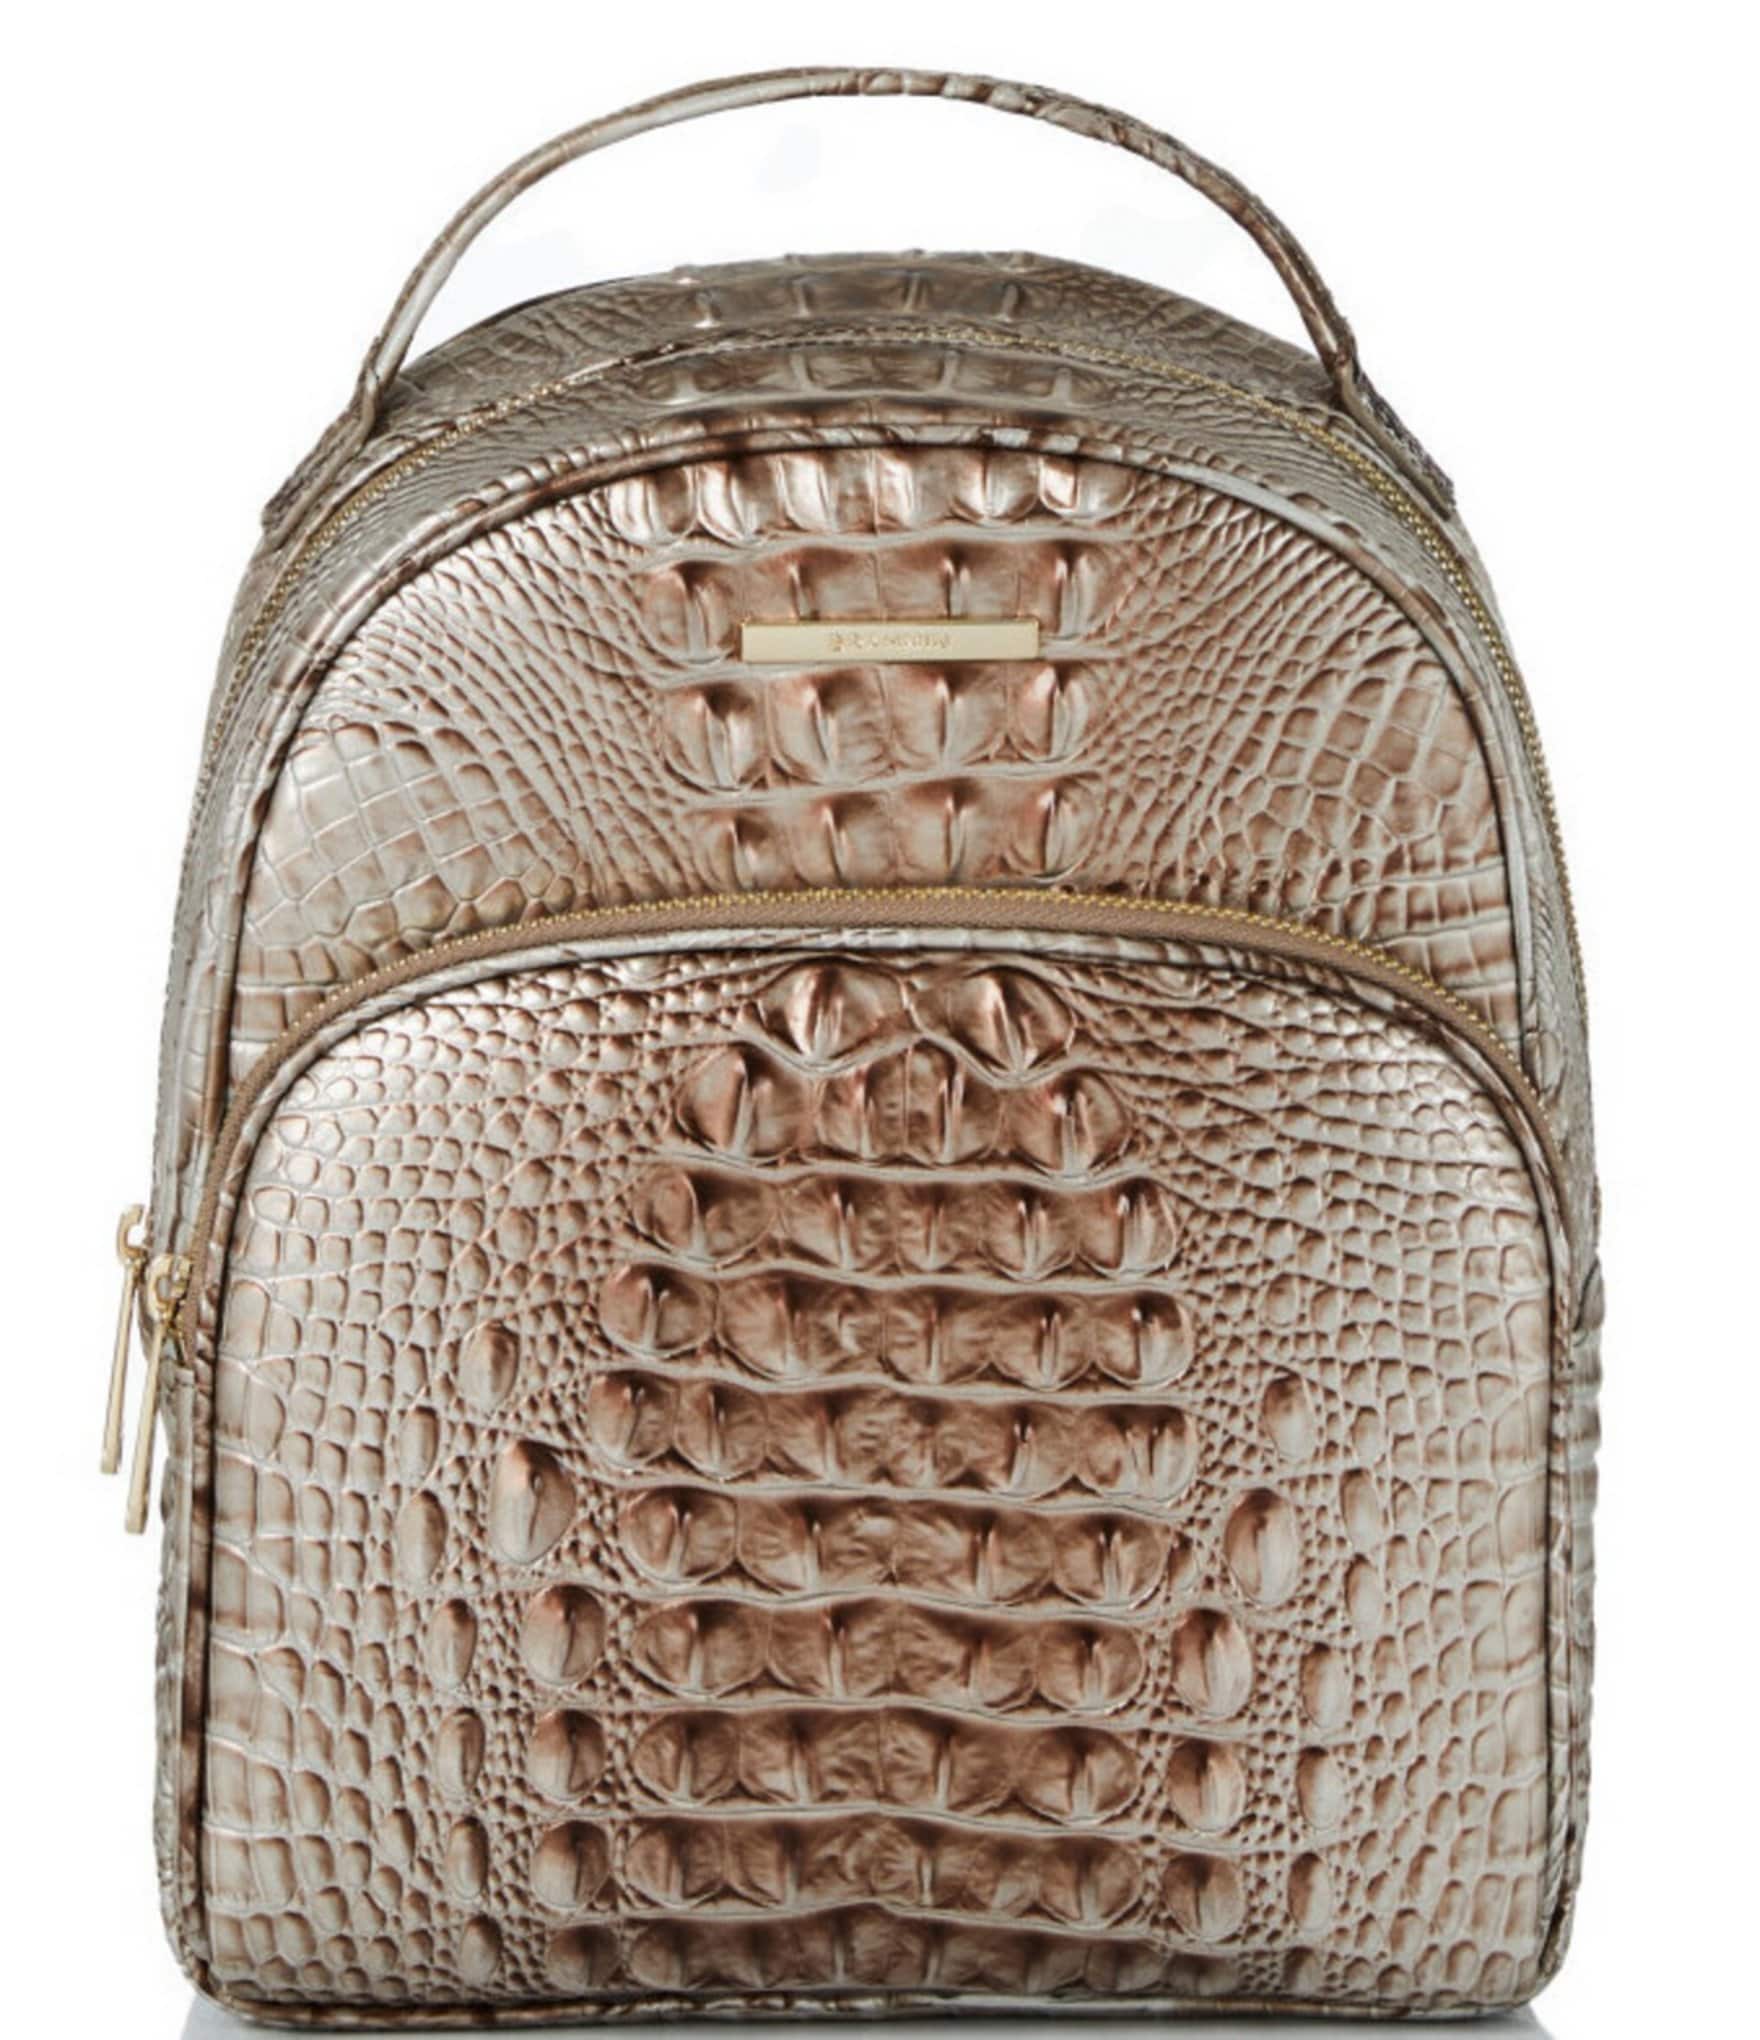 BRAHMIN Ombre Melbourne Collection Moira Infusion Tote Bag